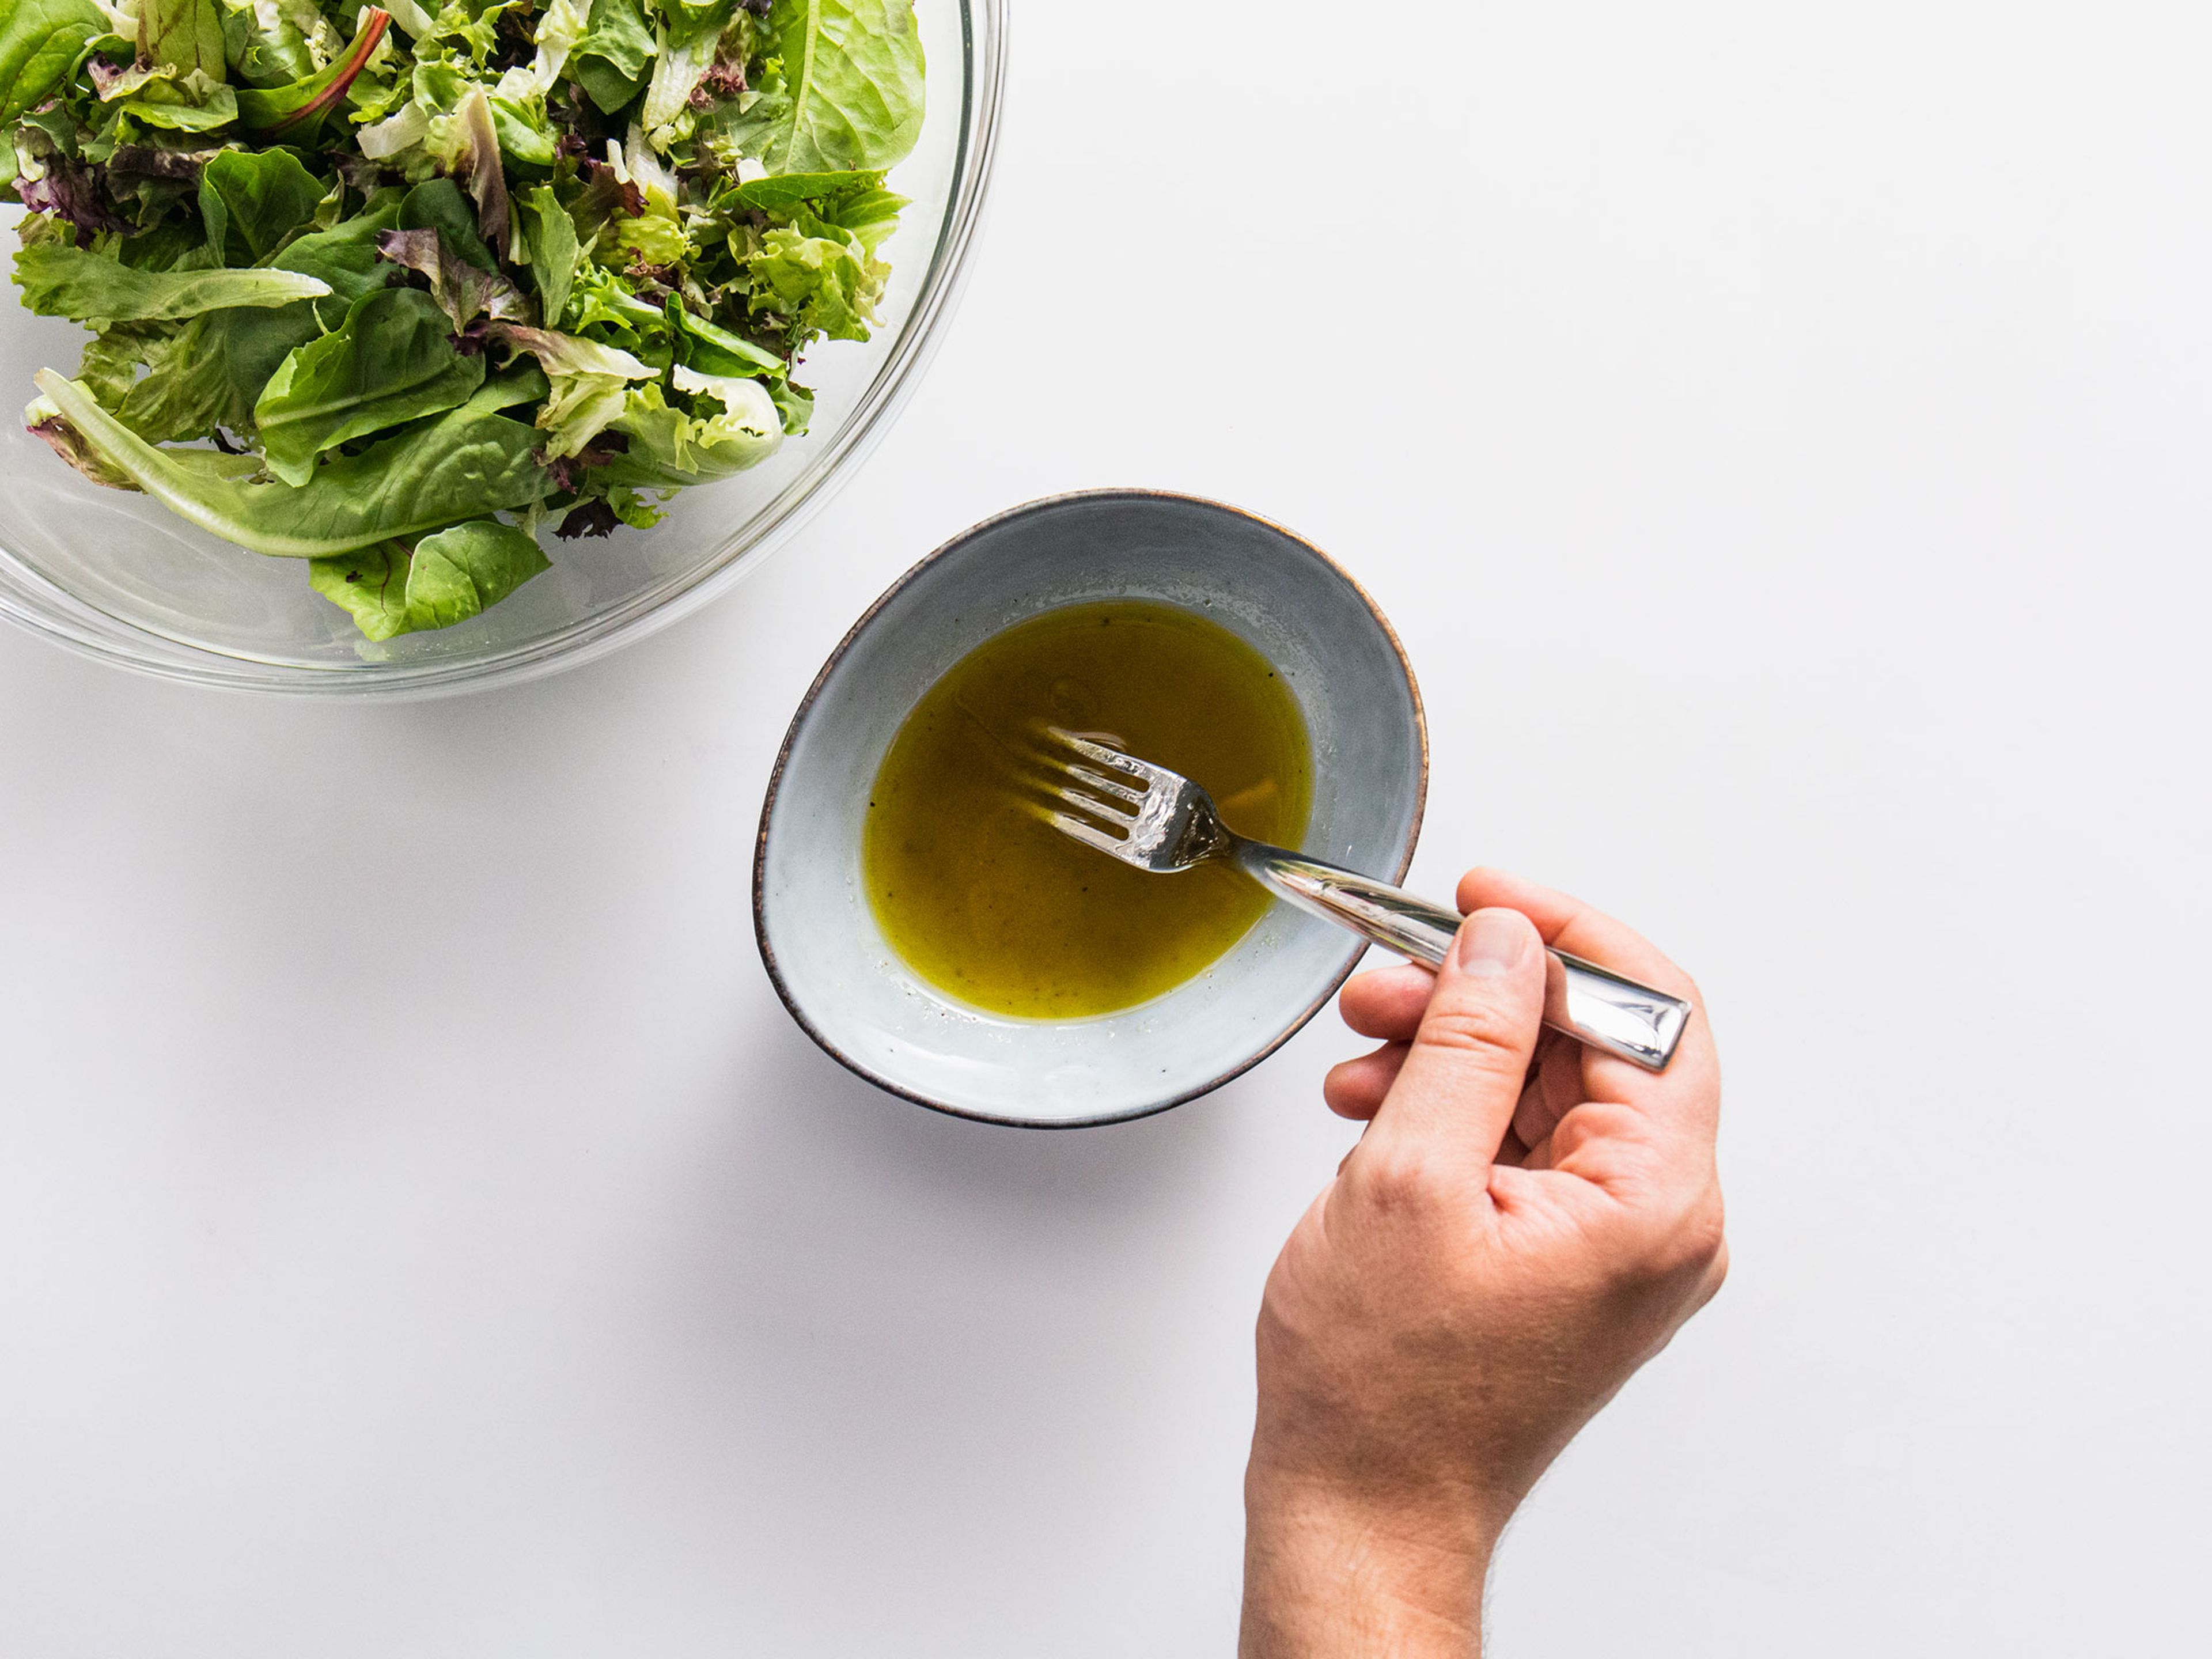 For the salad dressing, add remaining lemon juice and olive oil to a bowl and season with salt, pepper, and sugar to taste. Set aside for serving.